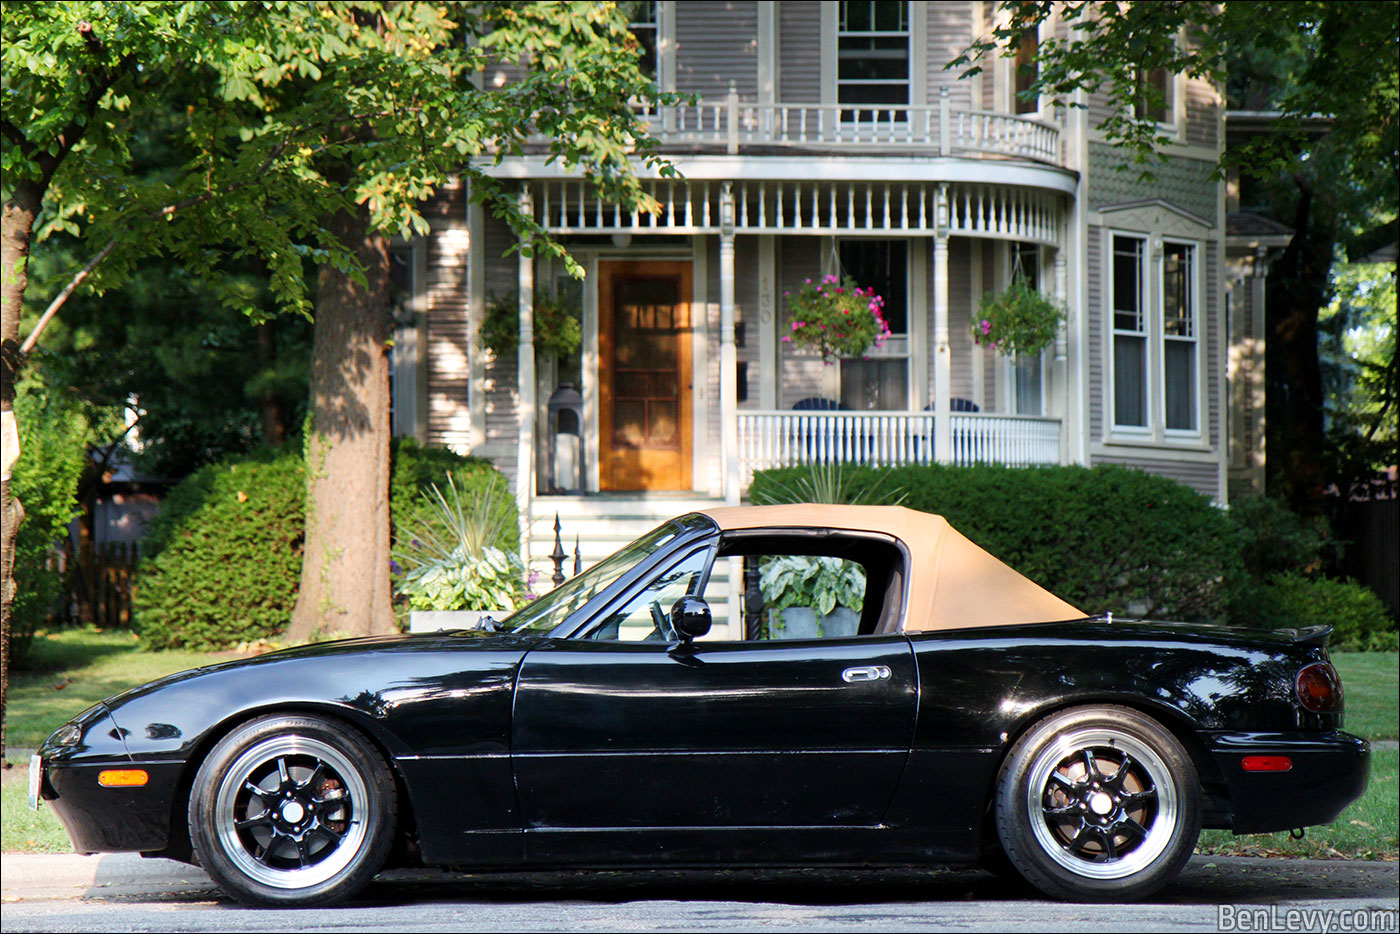 Mazda Miata in front of the John D. Caldwell House